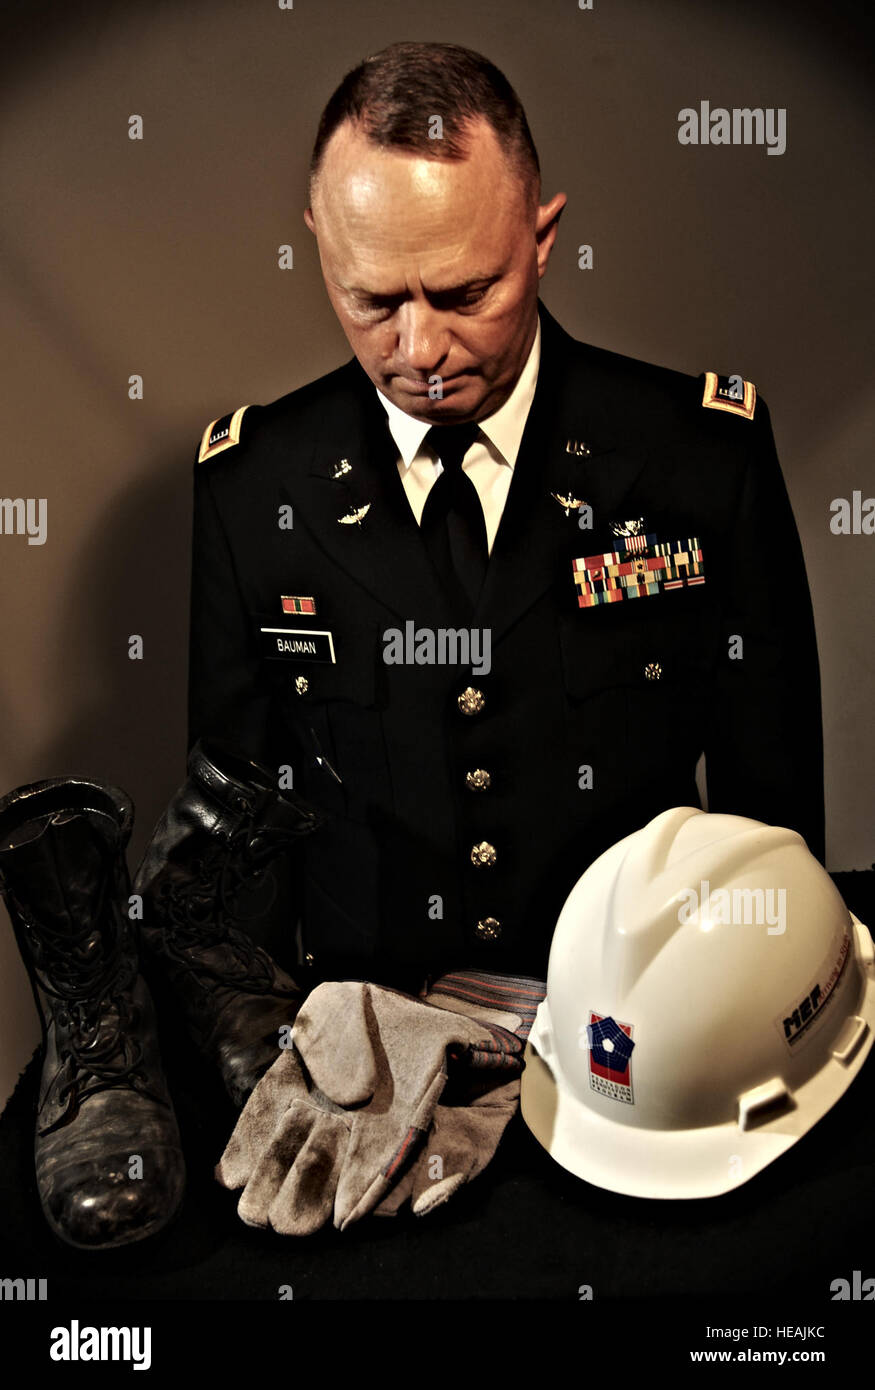 U.S. Army National Guard Chief Warrant Officer 4 Clifford Bauman, while at Langley Air Force Base, Va., Aug. 22, 2013, reflects on the boots, gloves and hat he wore during search and rescue missions at the Pentagon, Washington, D.C., after the Sept. 11, 2001 attacks. After the missions were over, Bauman placed the work gear in closet and did not touch them again until 12 years later. (U.S.  illustration by Staff Sgt. Jarad A. Denton Stock Photo